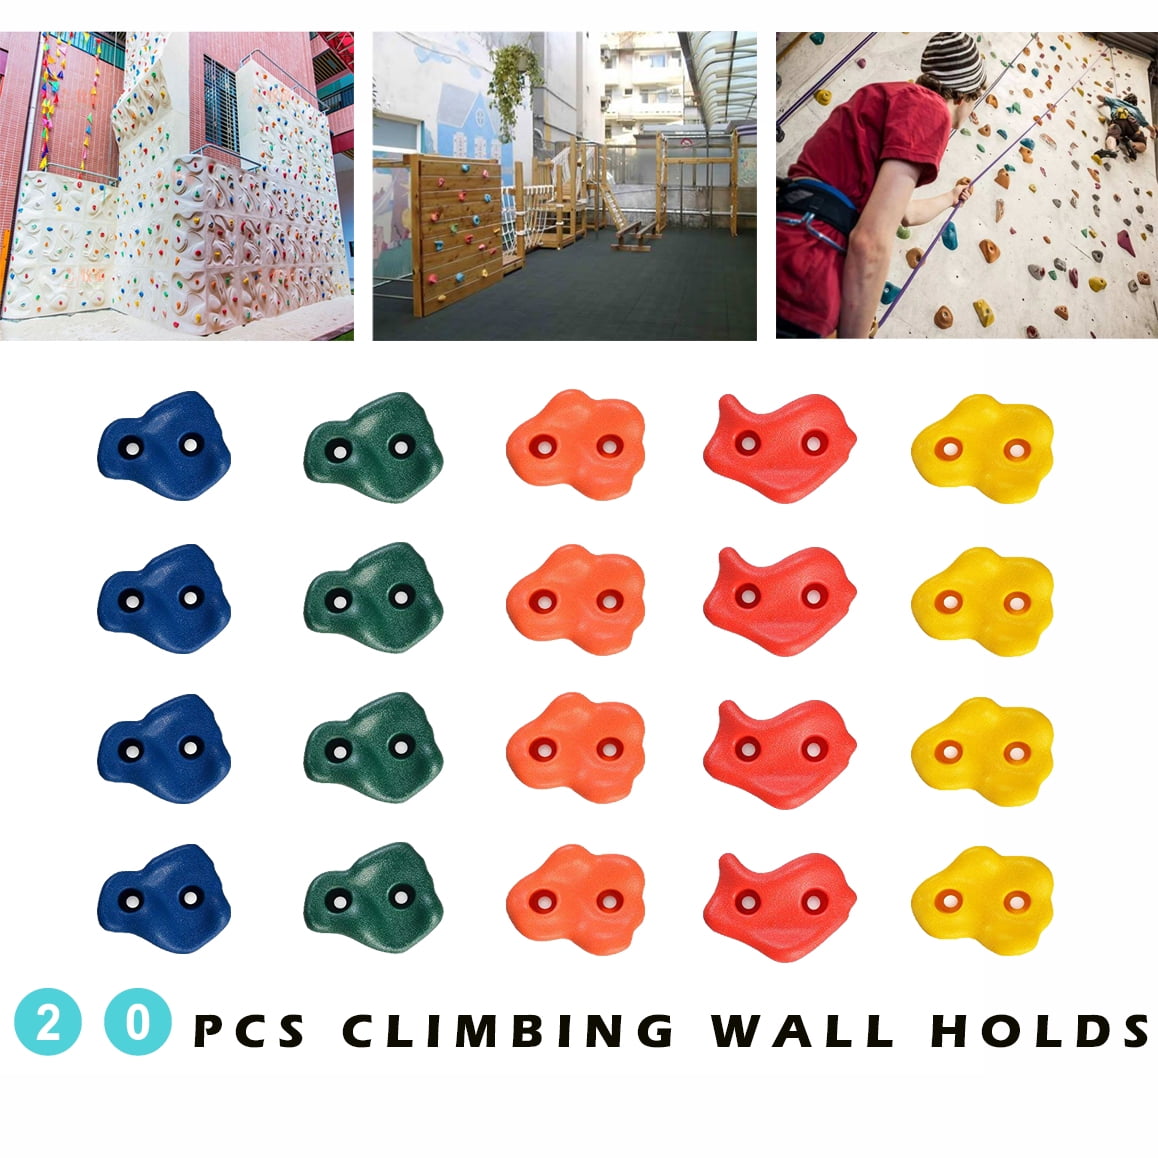 Dilwe Rock Climbing Holds 10 Pcs Safety Comfortable Climbing Stones Kit with Hardware Fittings for Children Playground